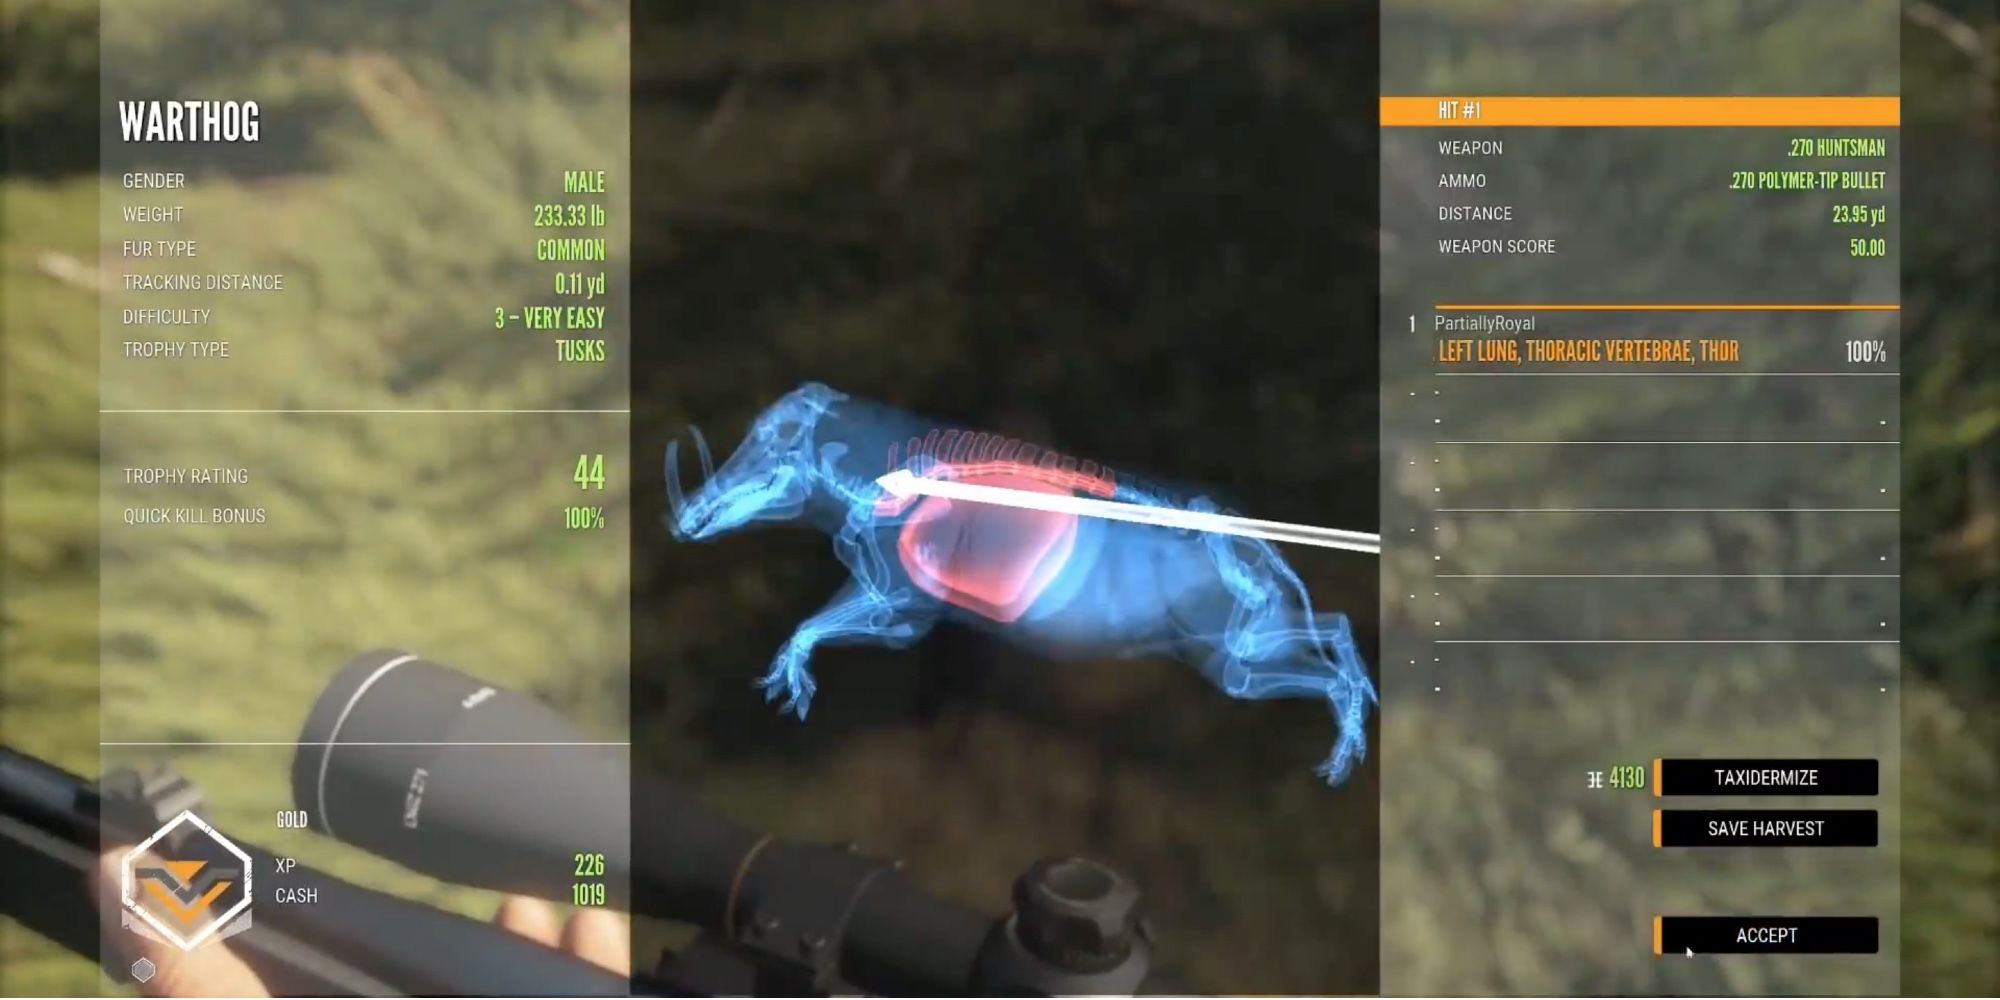 TheHunter - Call of the Wild - Use Appropriate Guns For Getting A Higher Score - Player uses .270 Huntsman to kill Warthog